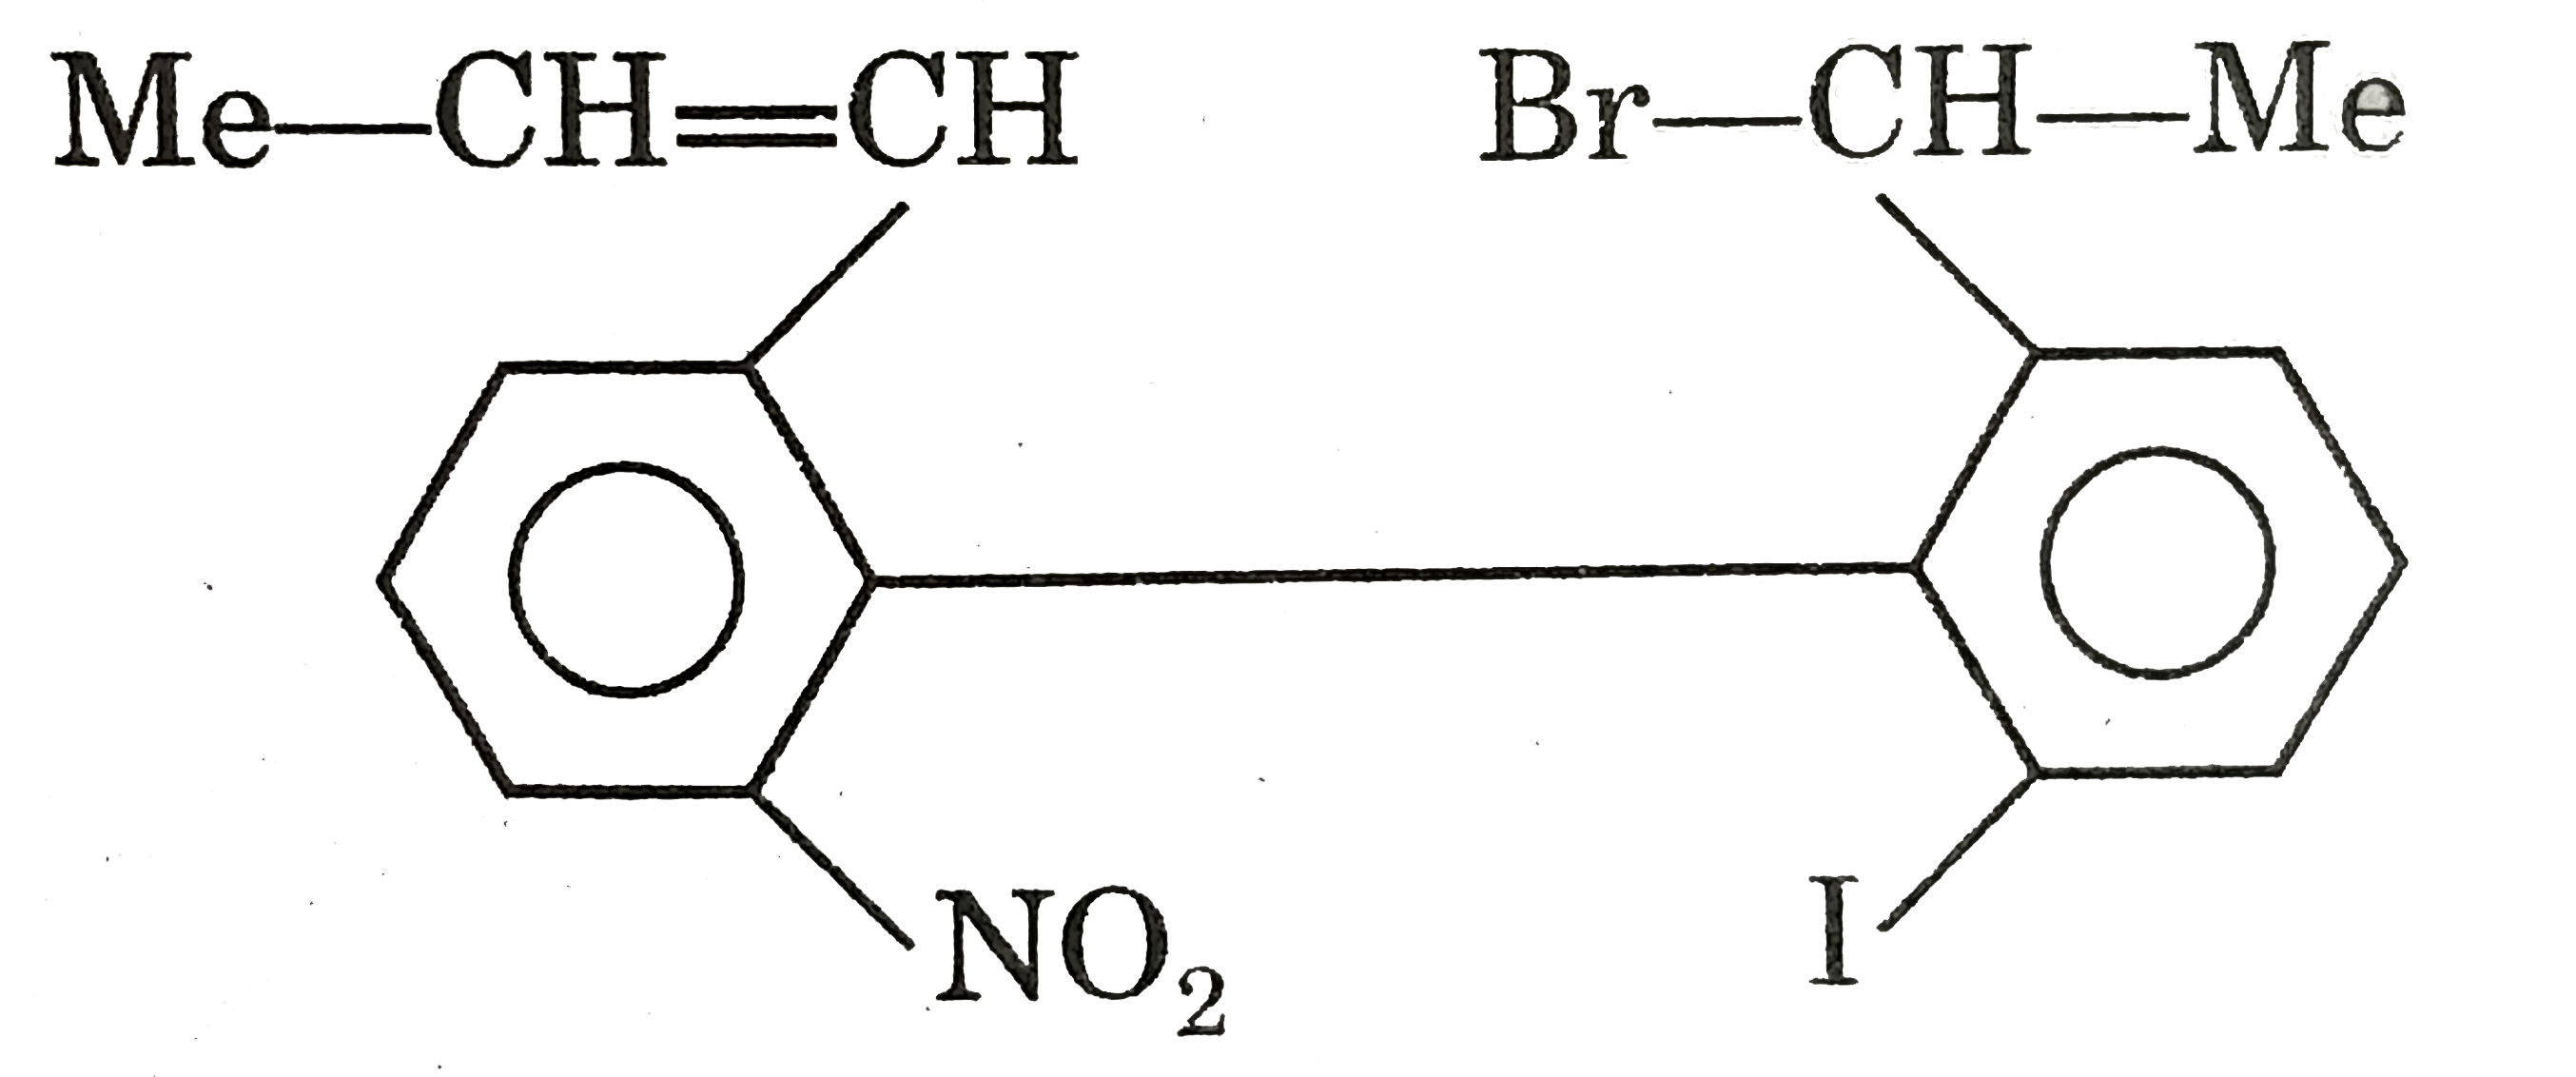 How many stereoismers are possible for the following compound?